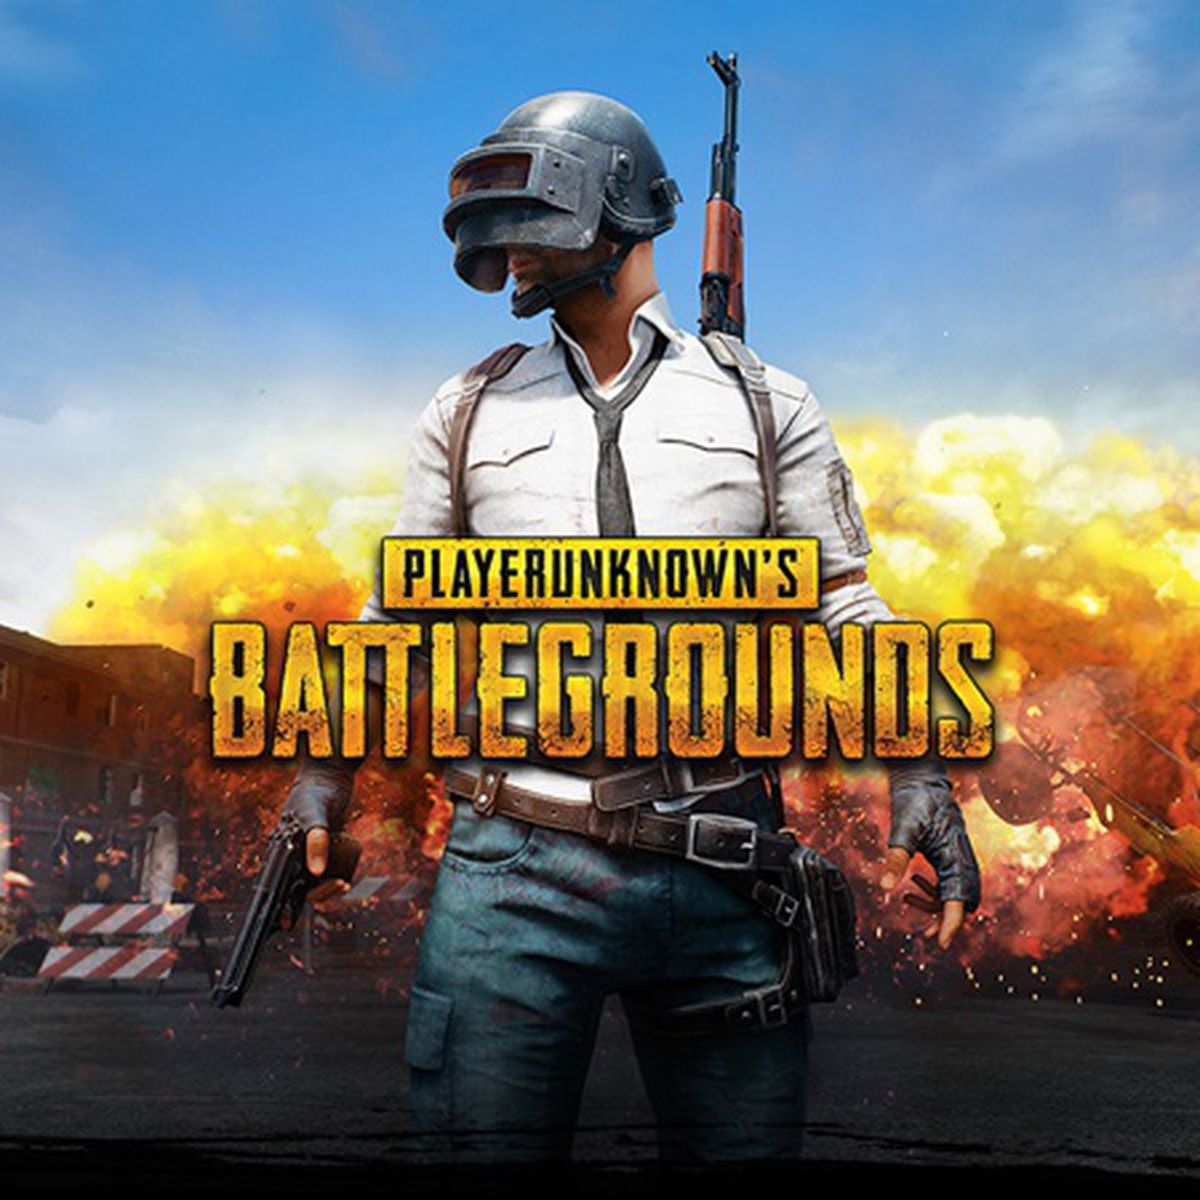 PUBG Maker Sues Apple and Google for Not Removing Clone Apps - MacRumors